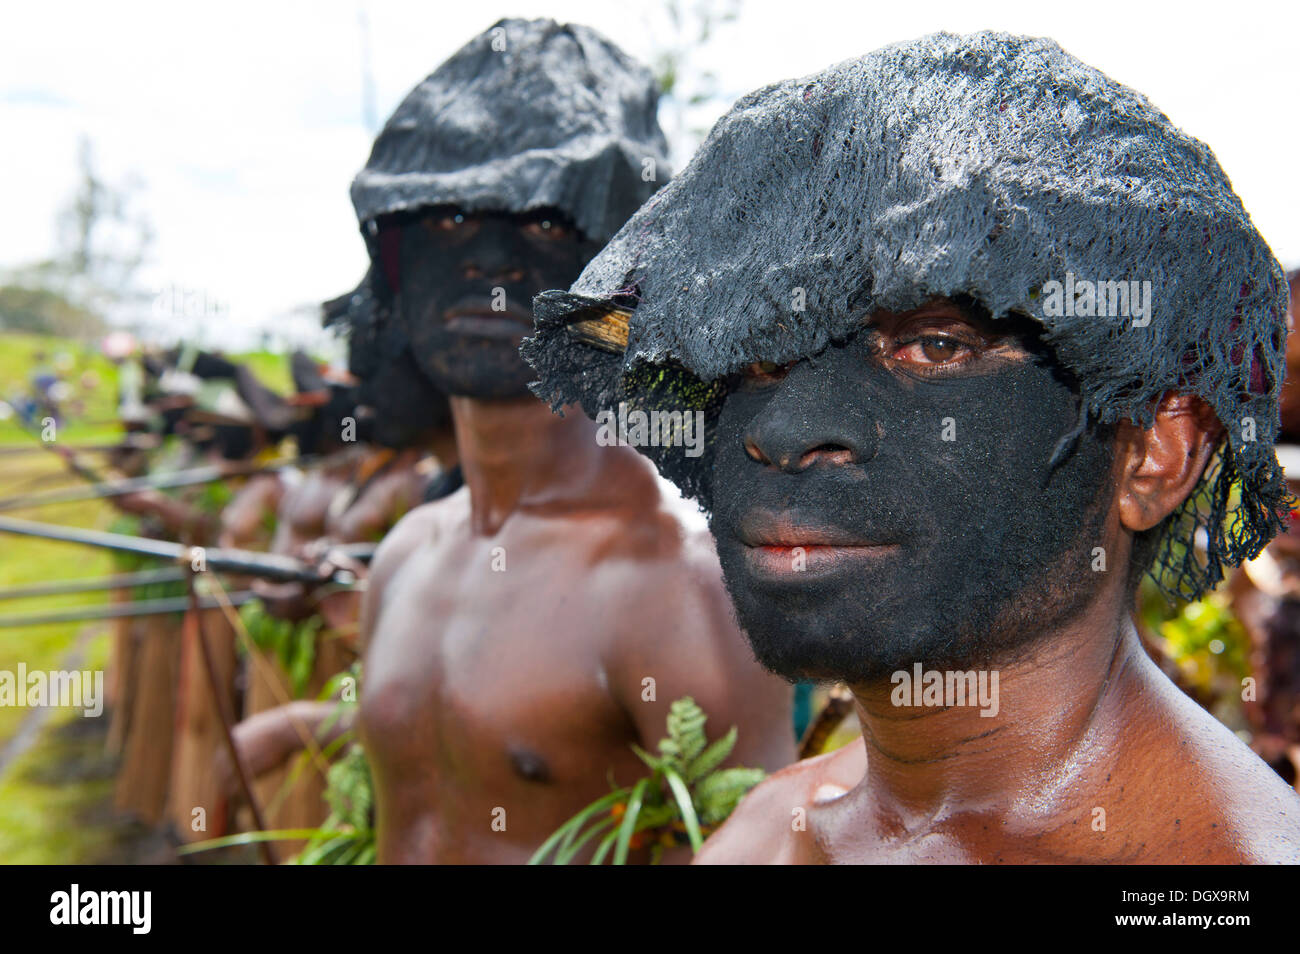 Members of a tribe with black painted faces at the traditional sing-sing gathering, Hochland, Mount Hagen Stock Photo